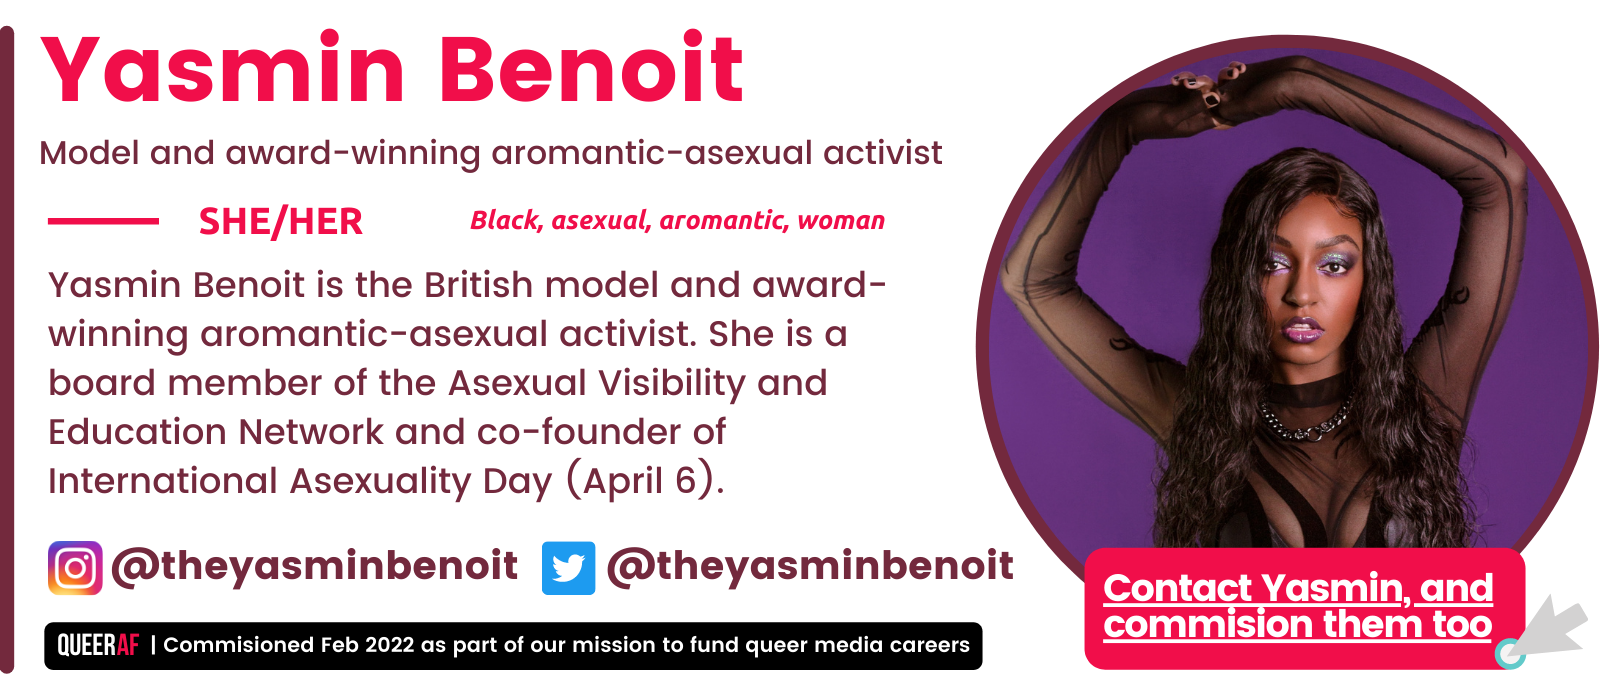 SHE/Her Yasmin Benoit is the British model and award-winning aromantic-asexual activist. She is a board member of the Asexual Visibility and Education Network and co-founder of International Asexuality Day (April 6). Black, asexual, aromantic, woman  Yasmin Benoit Model and award-winning aromantic-asexual activist